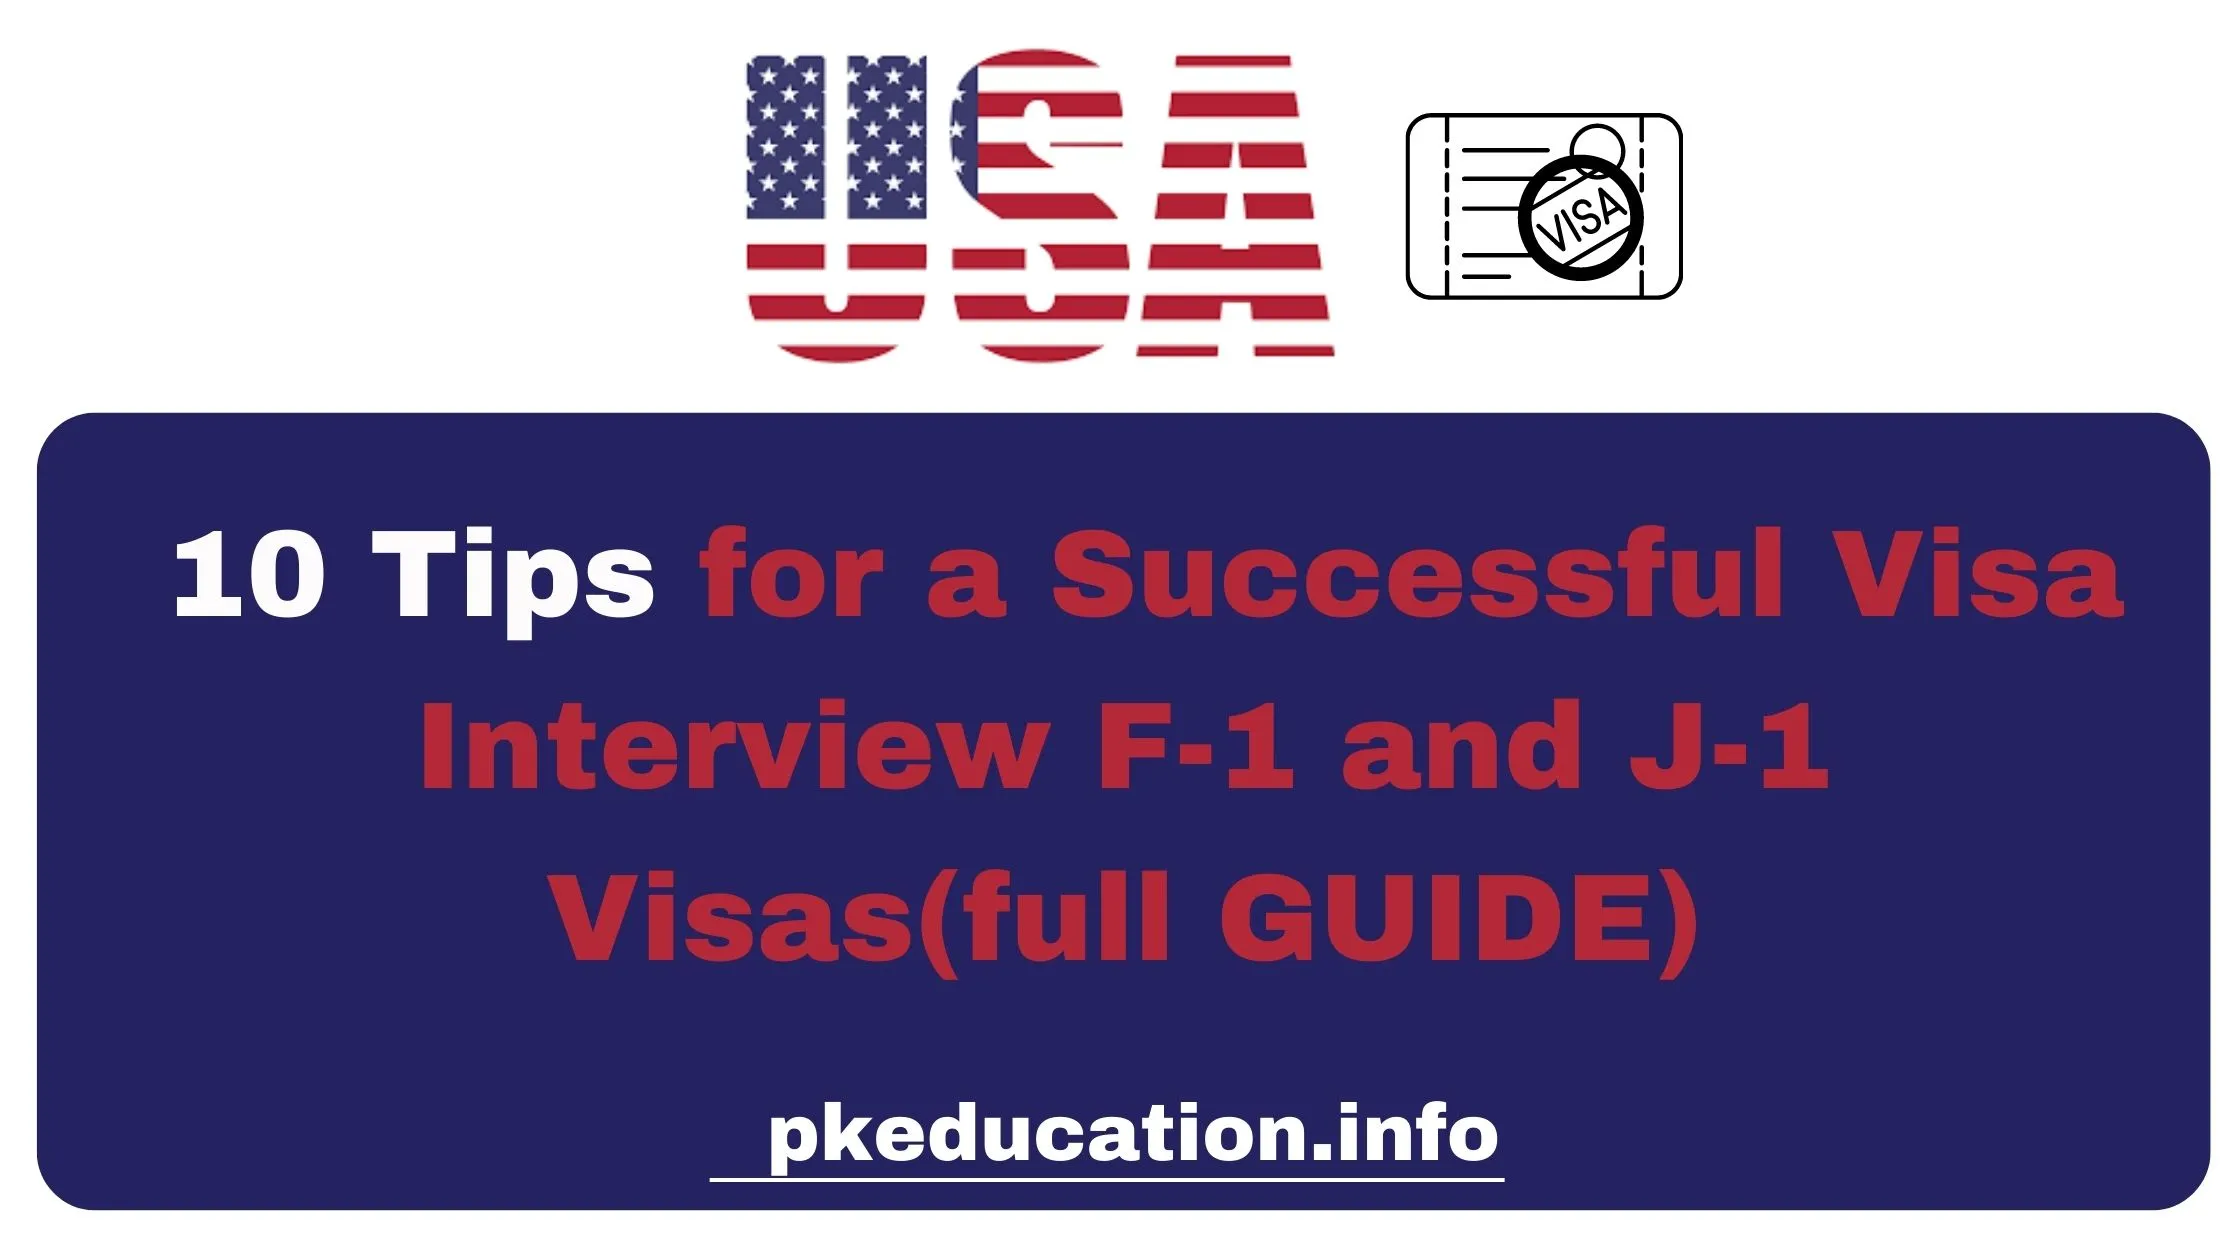 10 Tips for a Successful Visa Interview F-1 and J-1 Visas(full GUIDE)